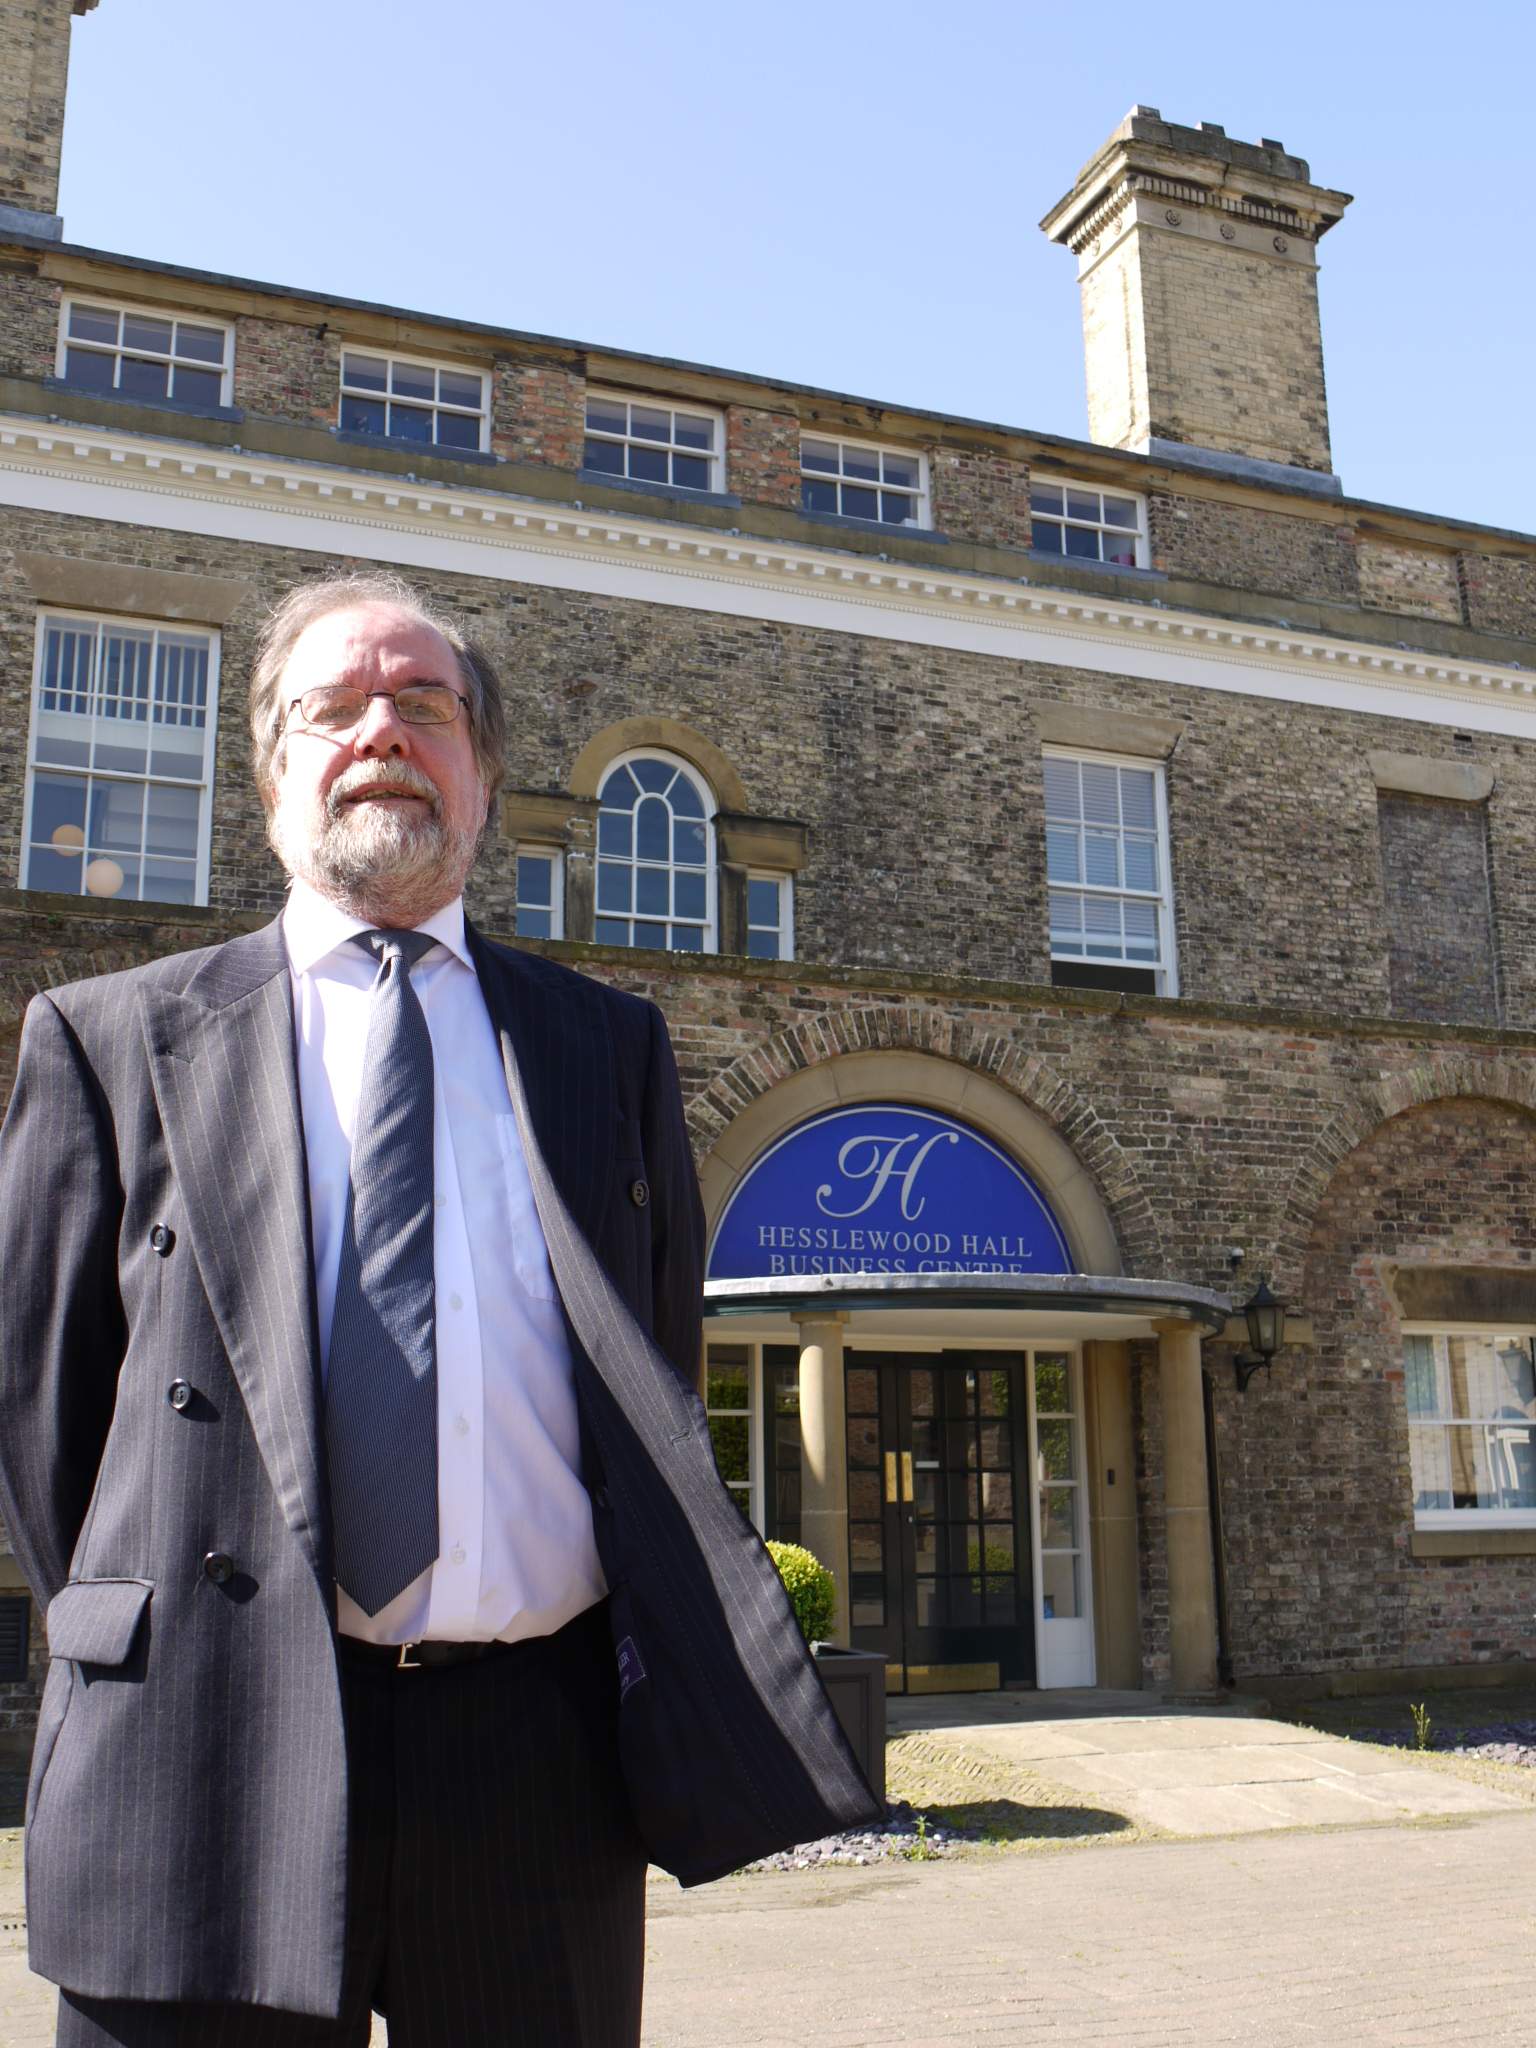 PSYCHOLOGY COMPANY TO MOVE INTO HESSLEWOOD HALL BUSINESS CENTRE